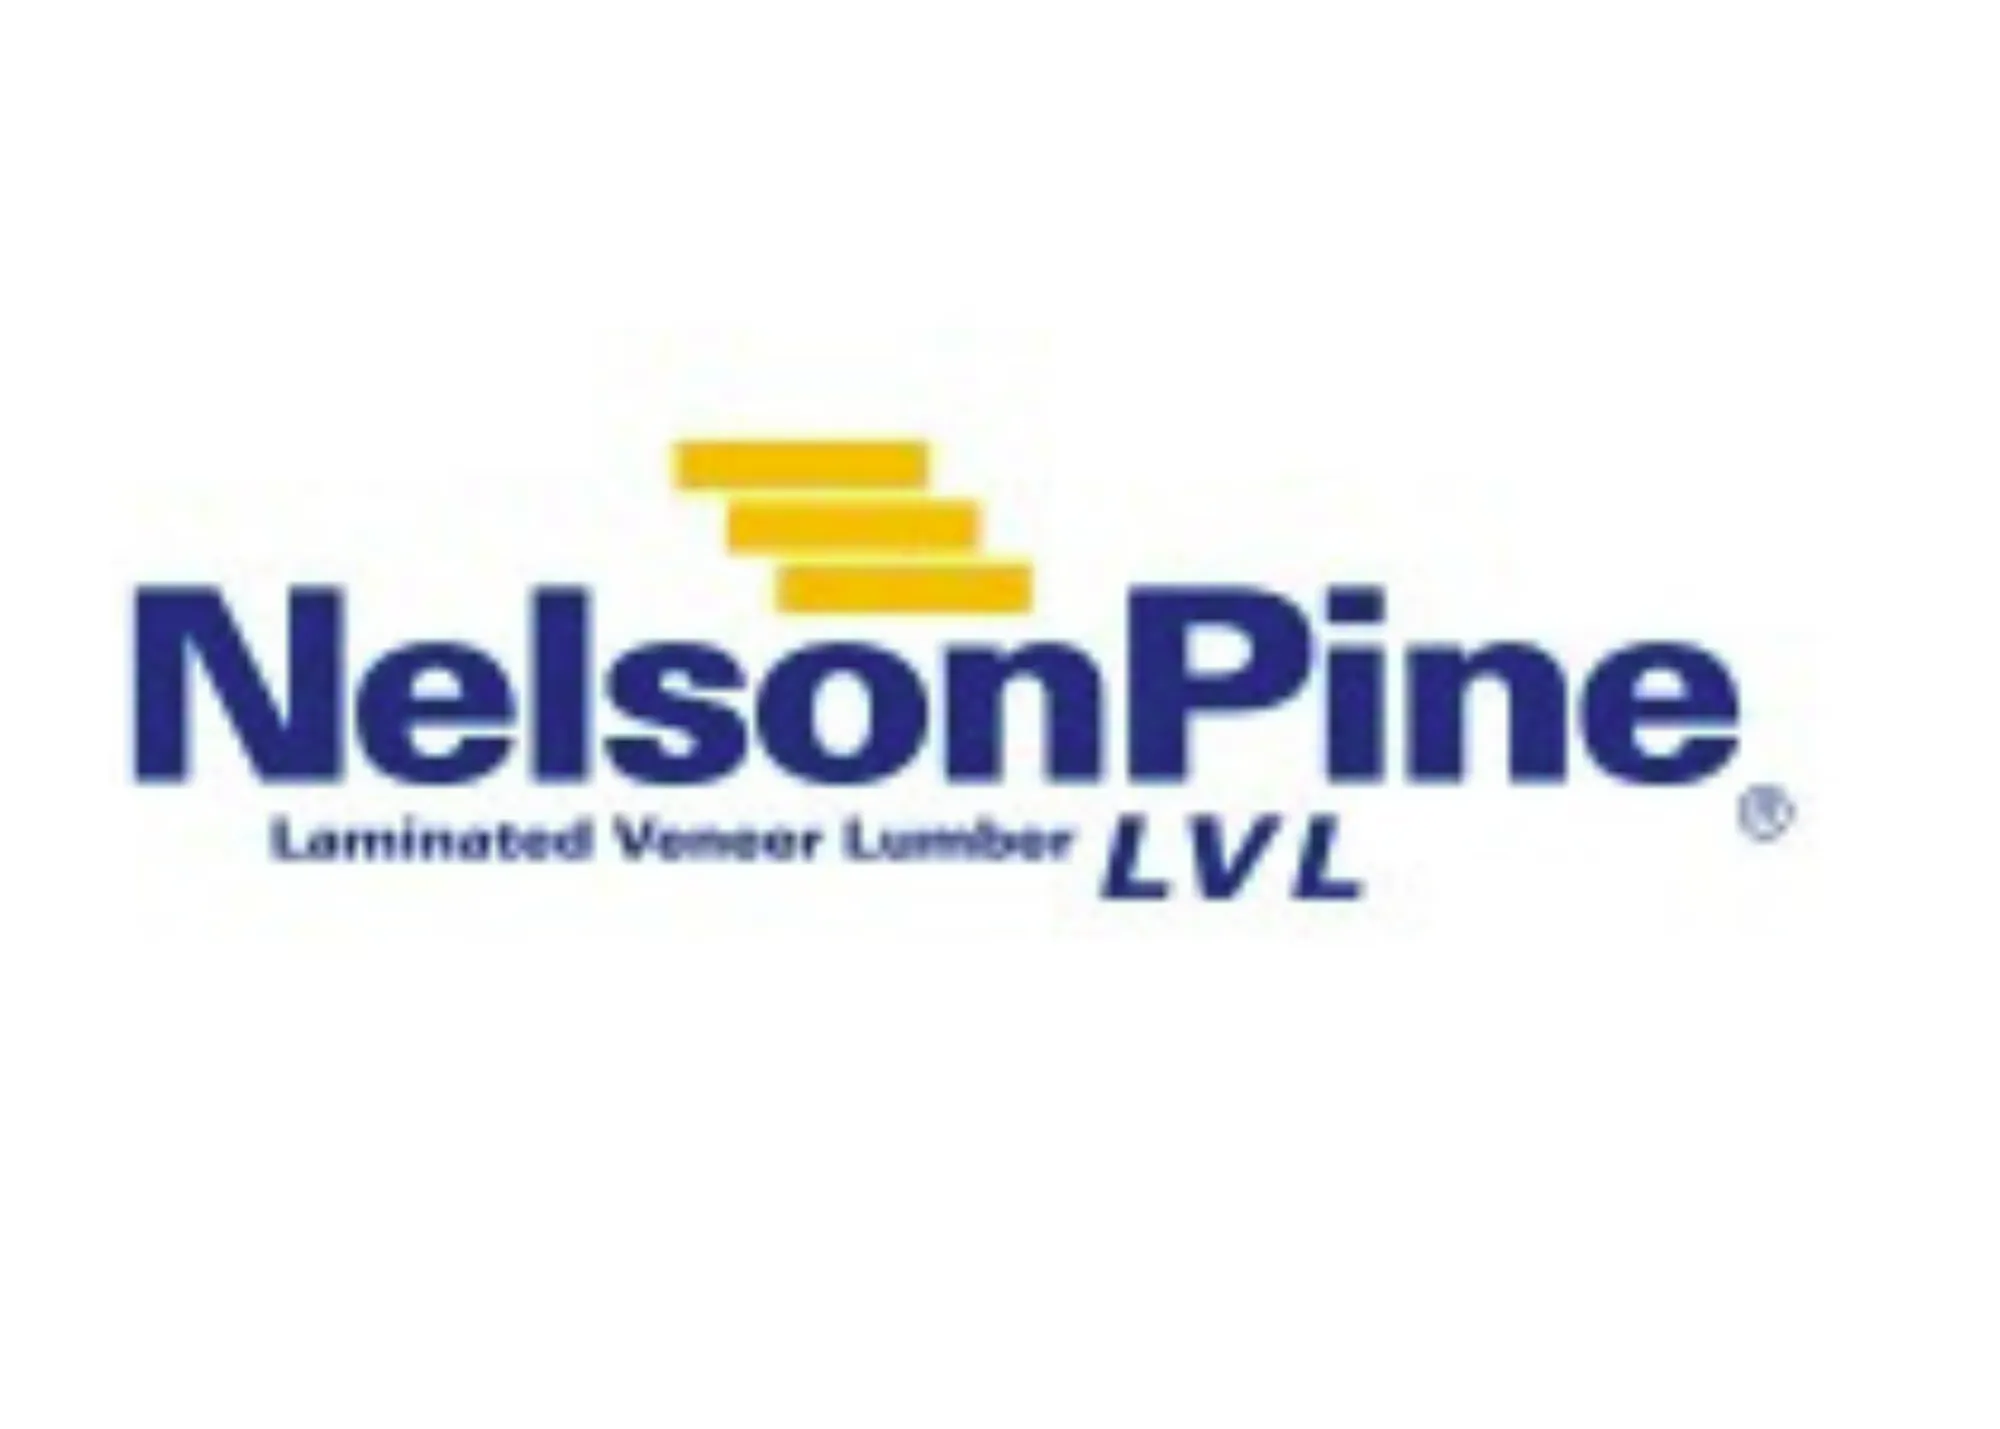 Nelson Pine Industries Limited